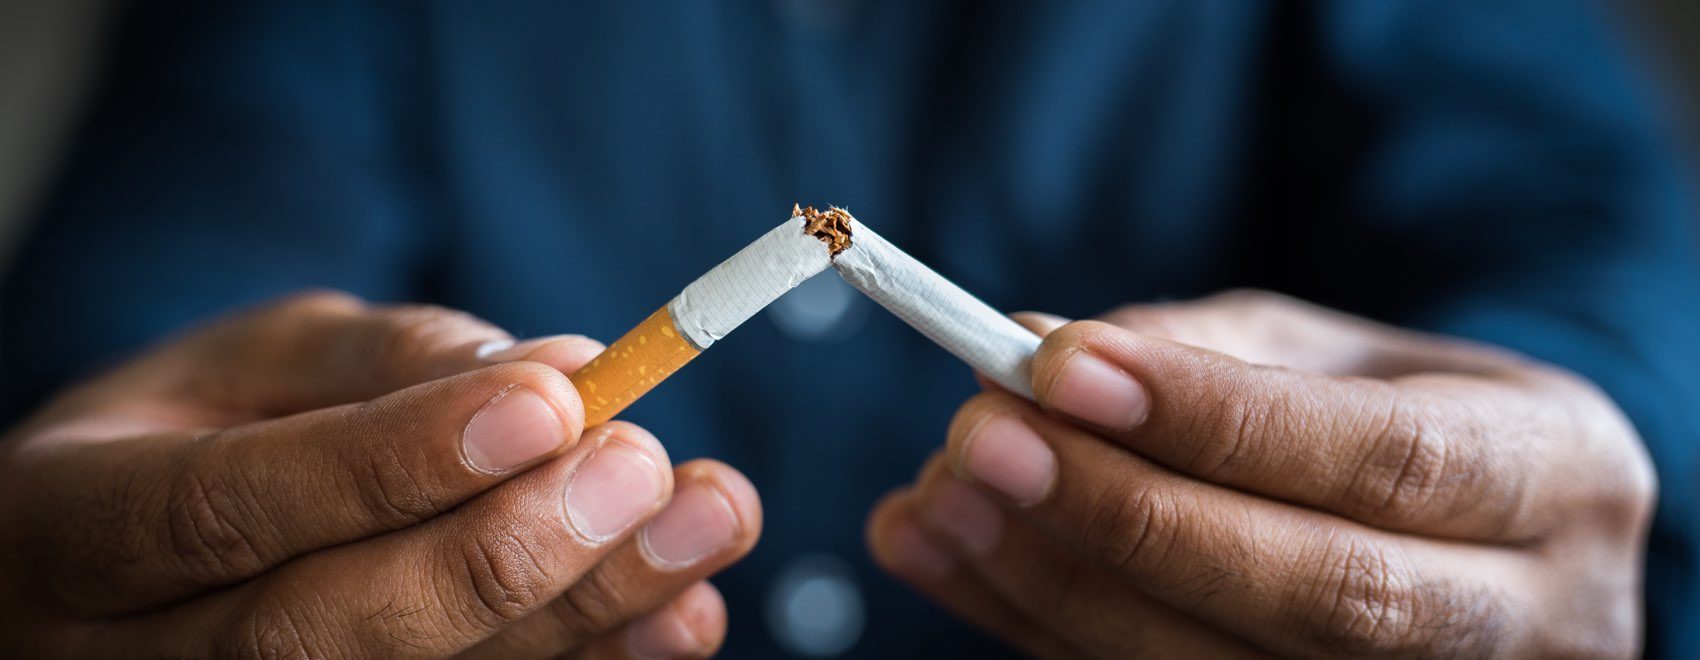 Quit smoking hypnosis sessions. Hypnotherapy to stop smoking in St Petersburg, Florida.